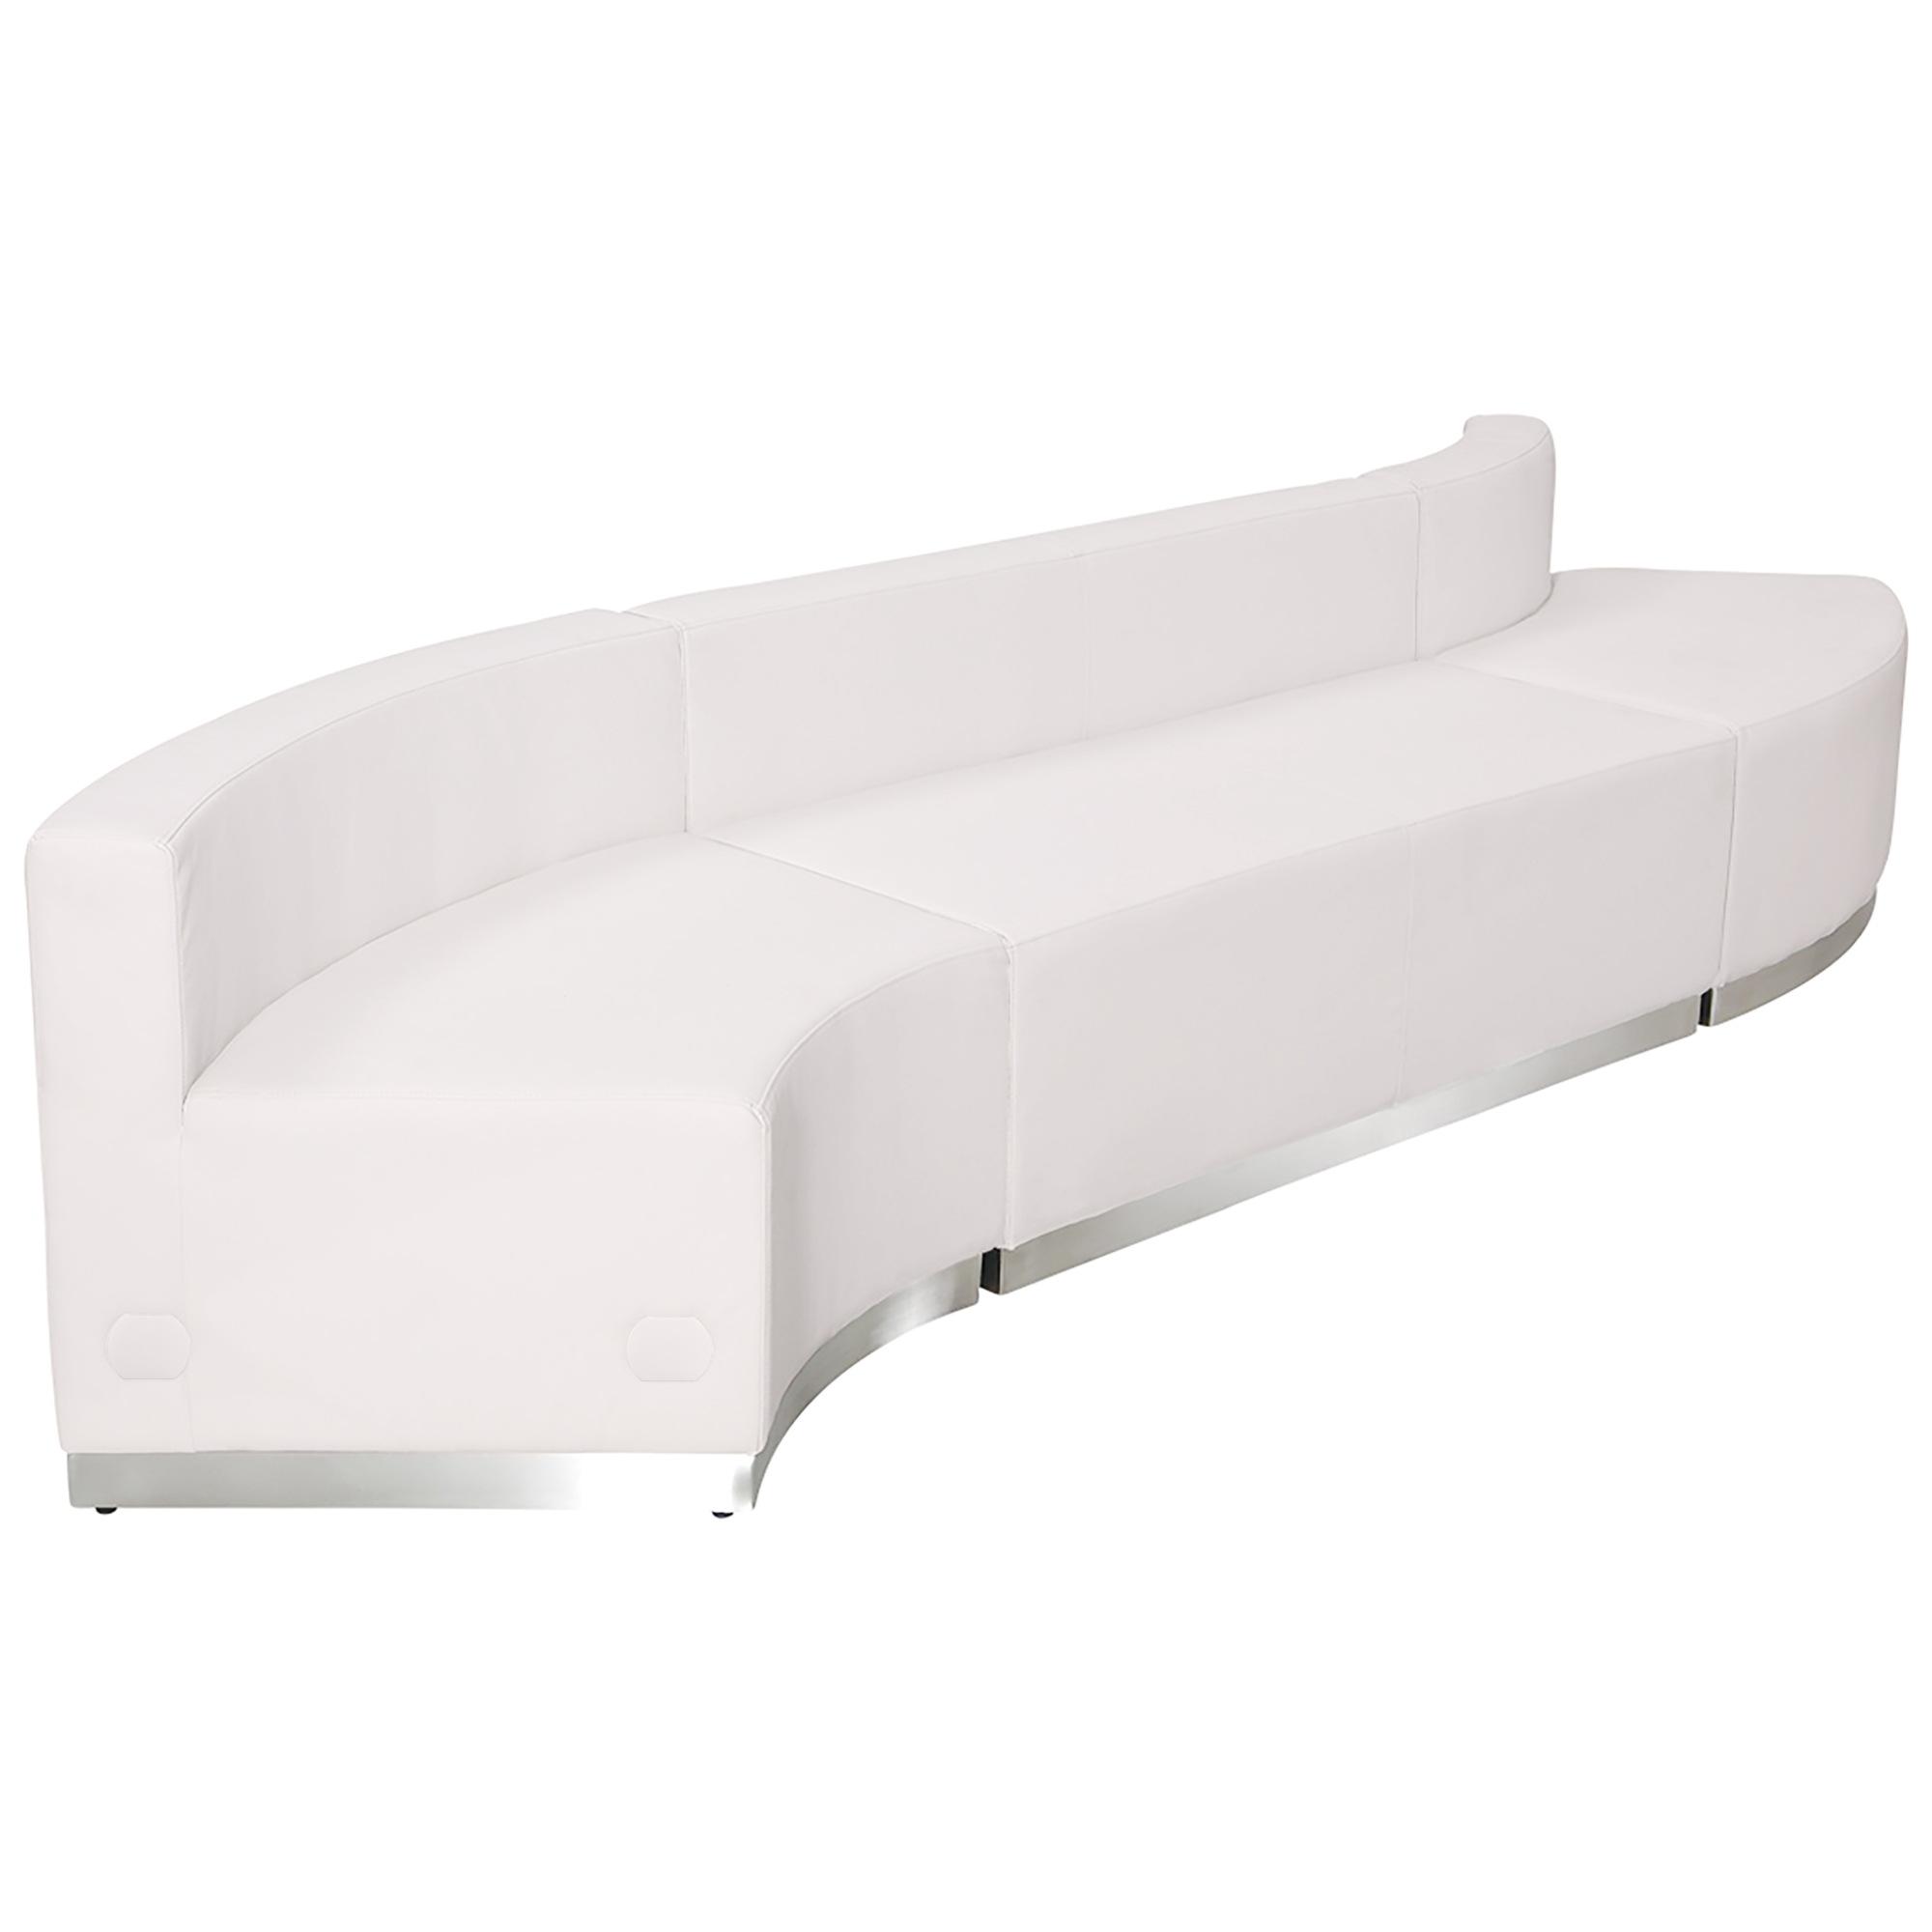 Flash Furniture, 3 PC White LeatherSoft Reception Configuration, Included (qty.) 3 Model ZB803850SWH